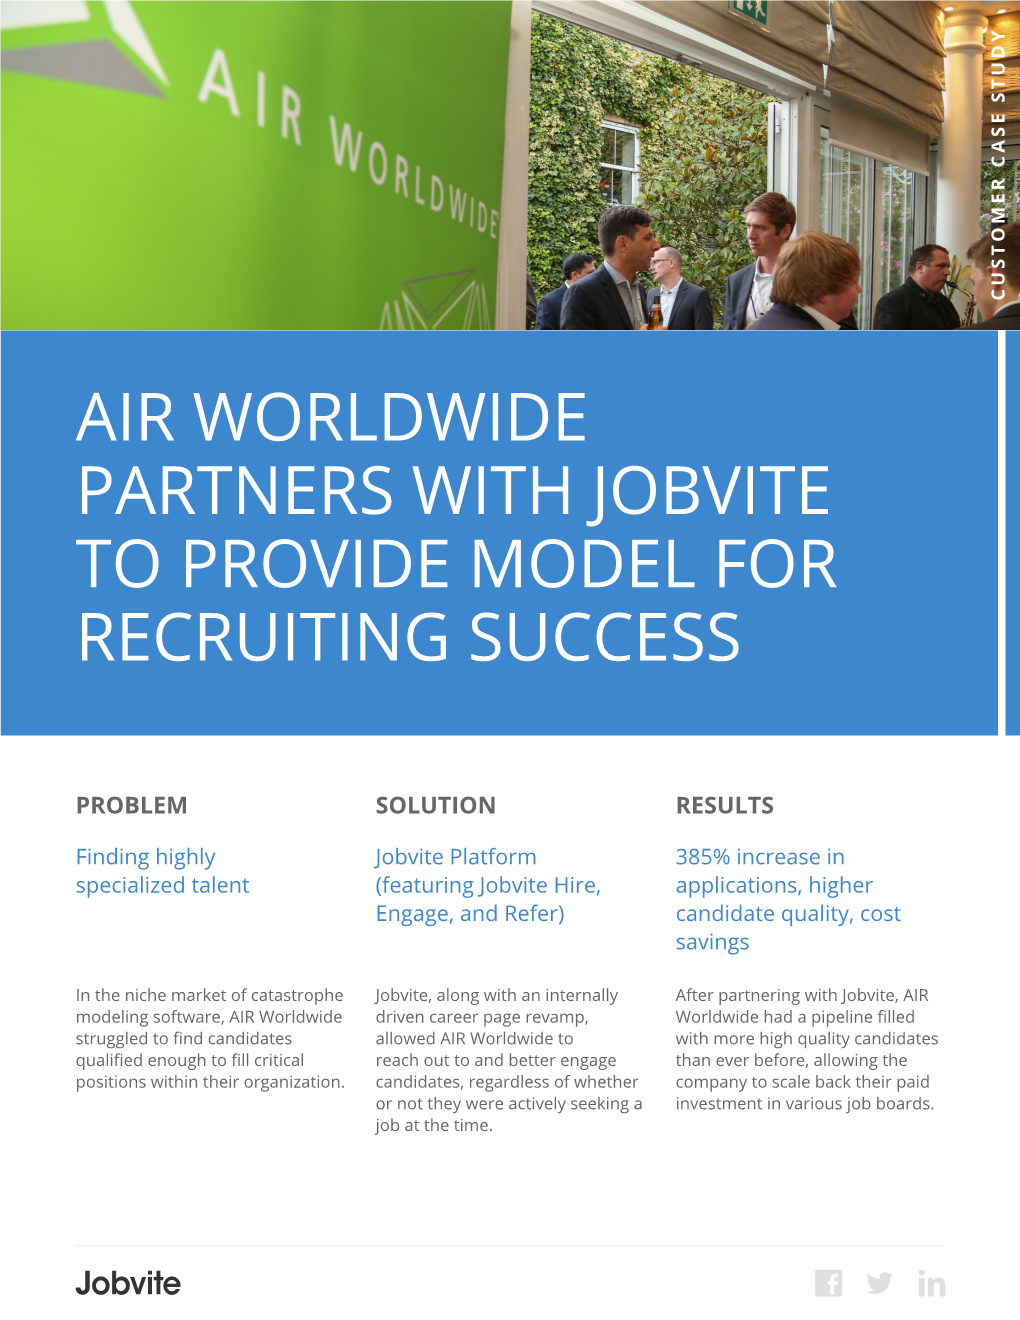 Air Worldwide Partners with Jobvite to Provide Model for Recruiting Success